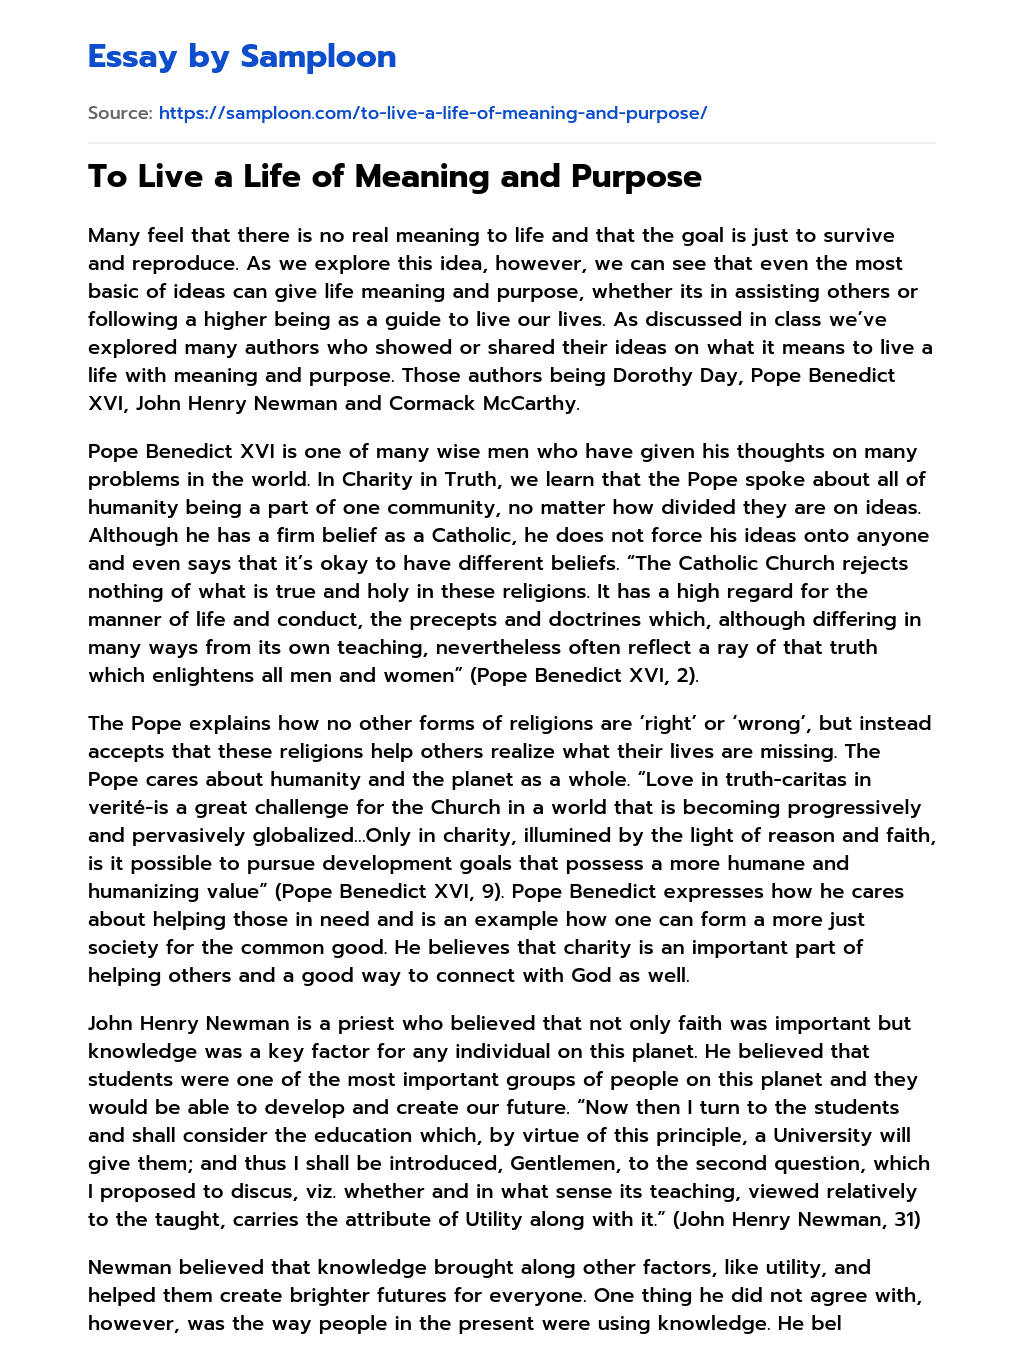 essay on what is meaning of life